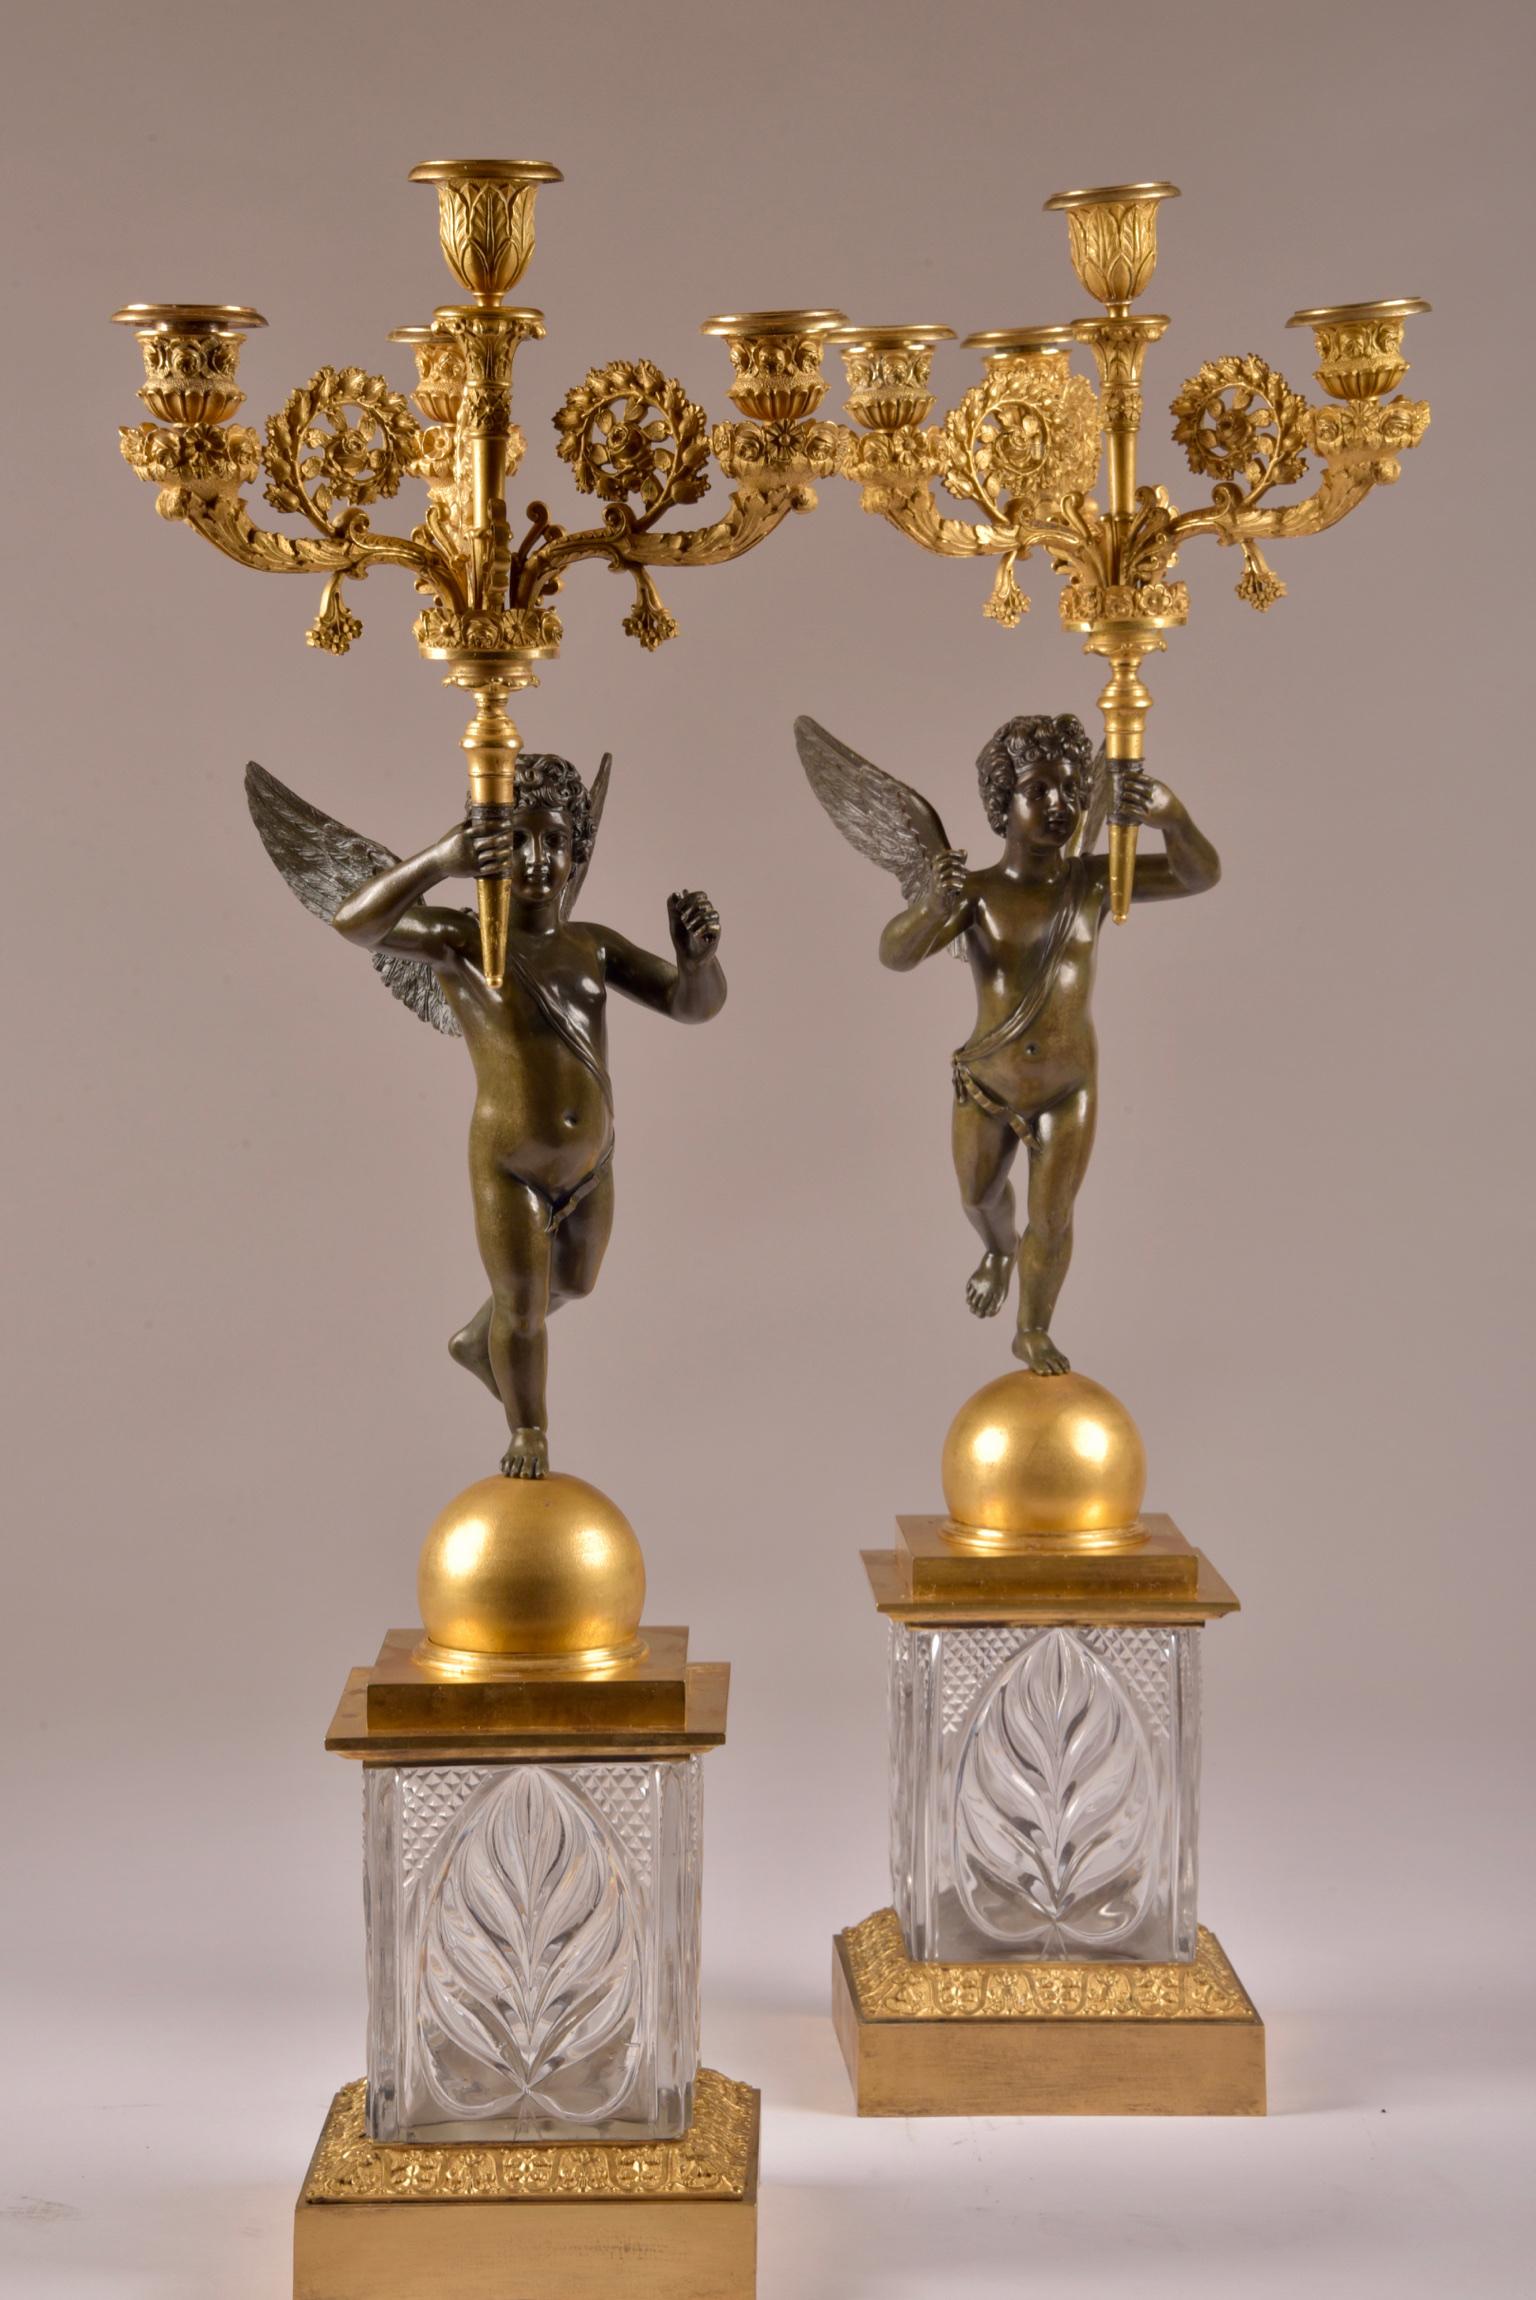 Pair of French Empire Candelabras with Putti, Superb Ormolu Candleholders, 1810  For Sale 7